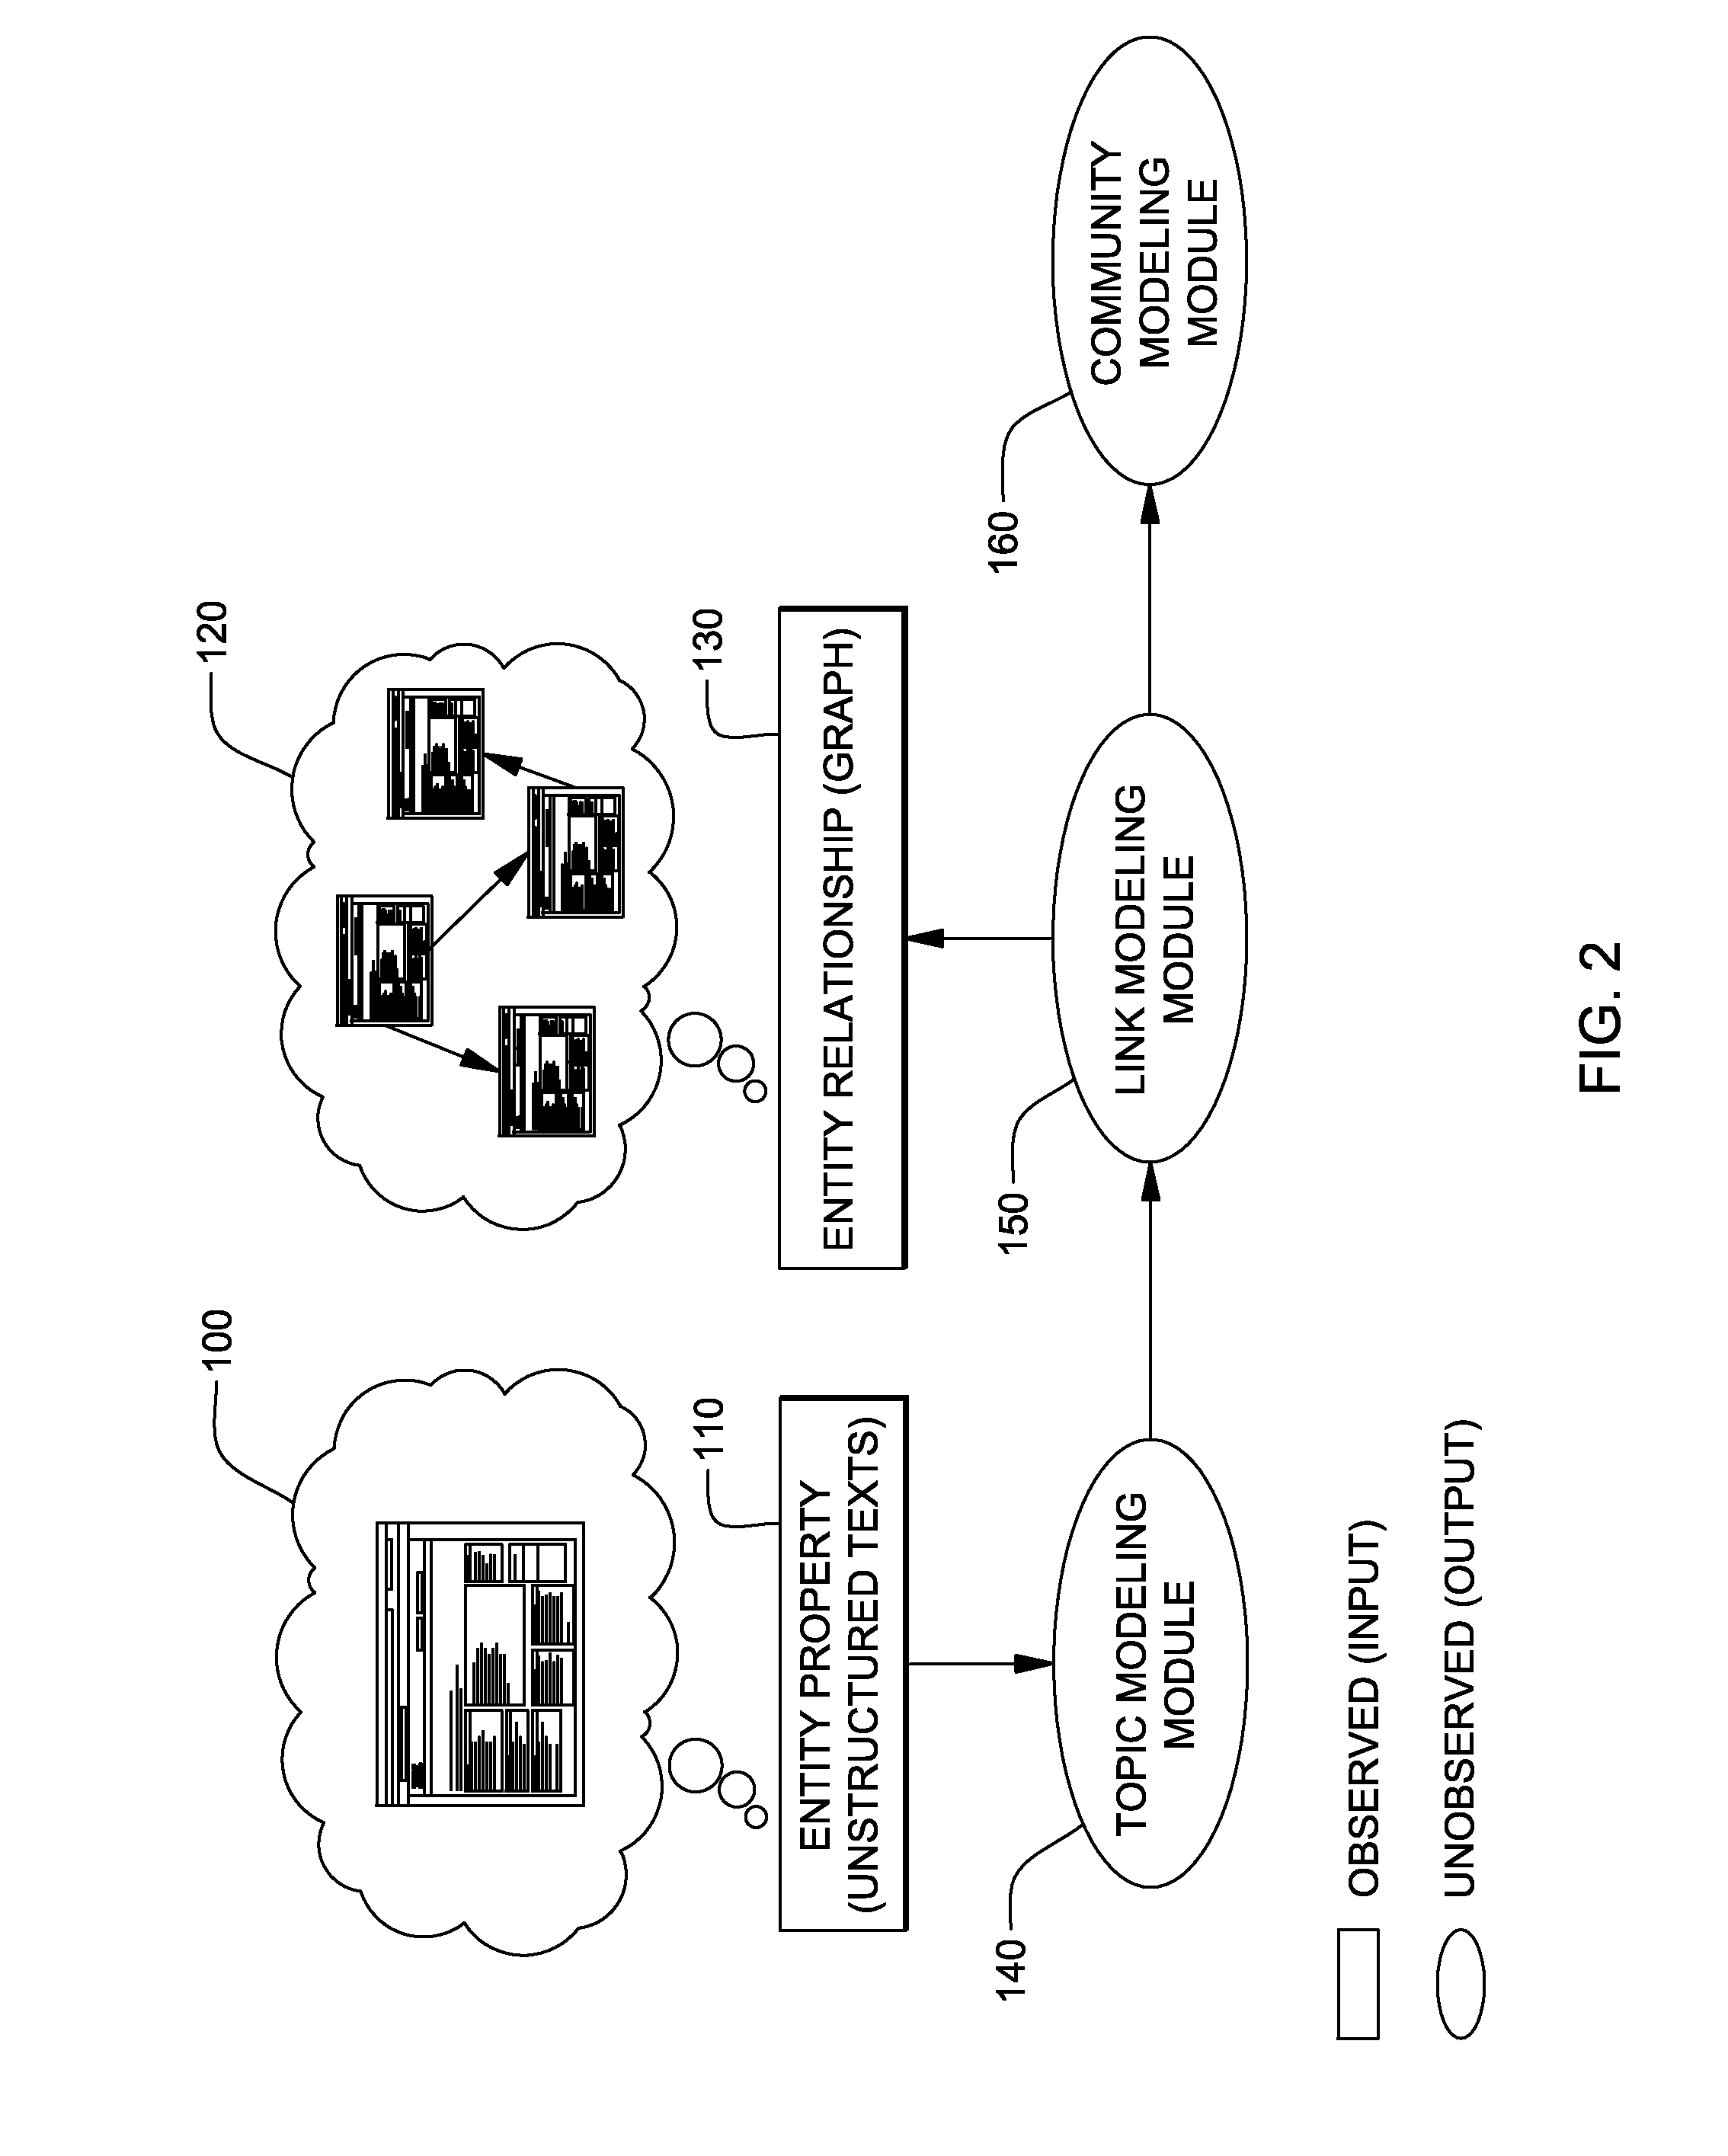 Systems and methods for extracting patterns from graph and unstructured data